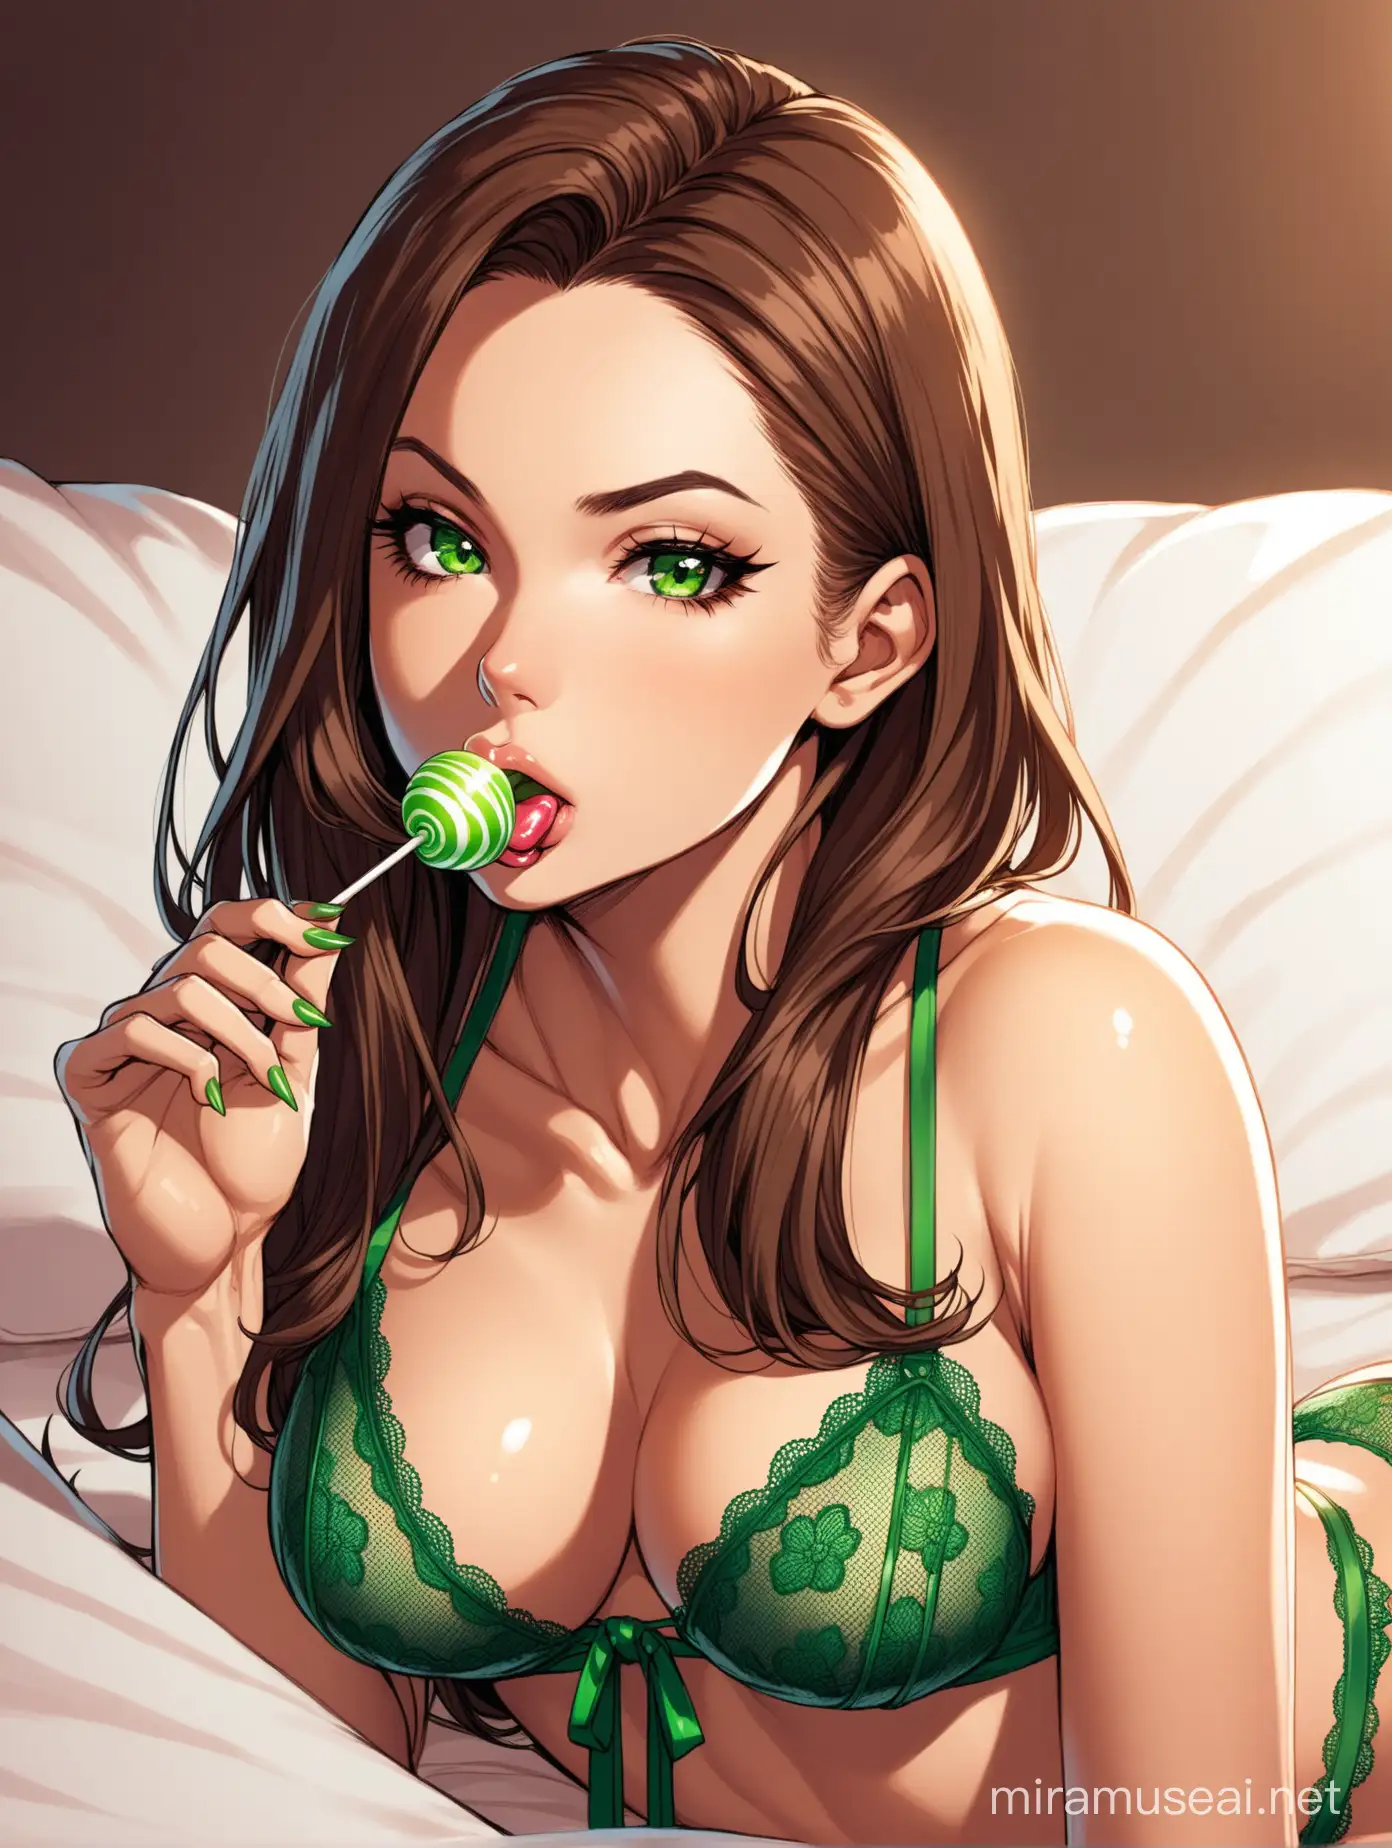 Seductive Rogue in Green Lace Lingerie with Lollipop